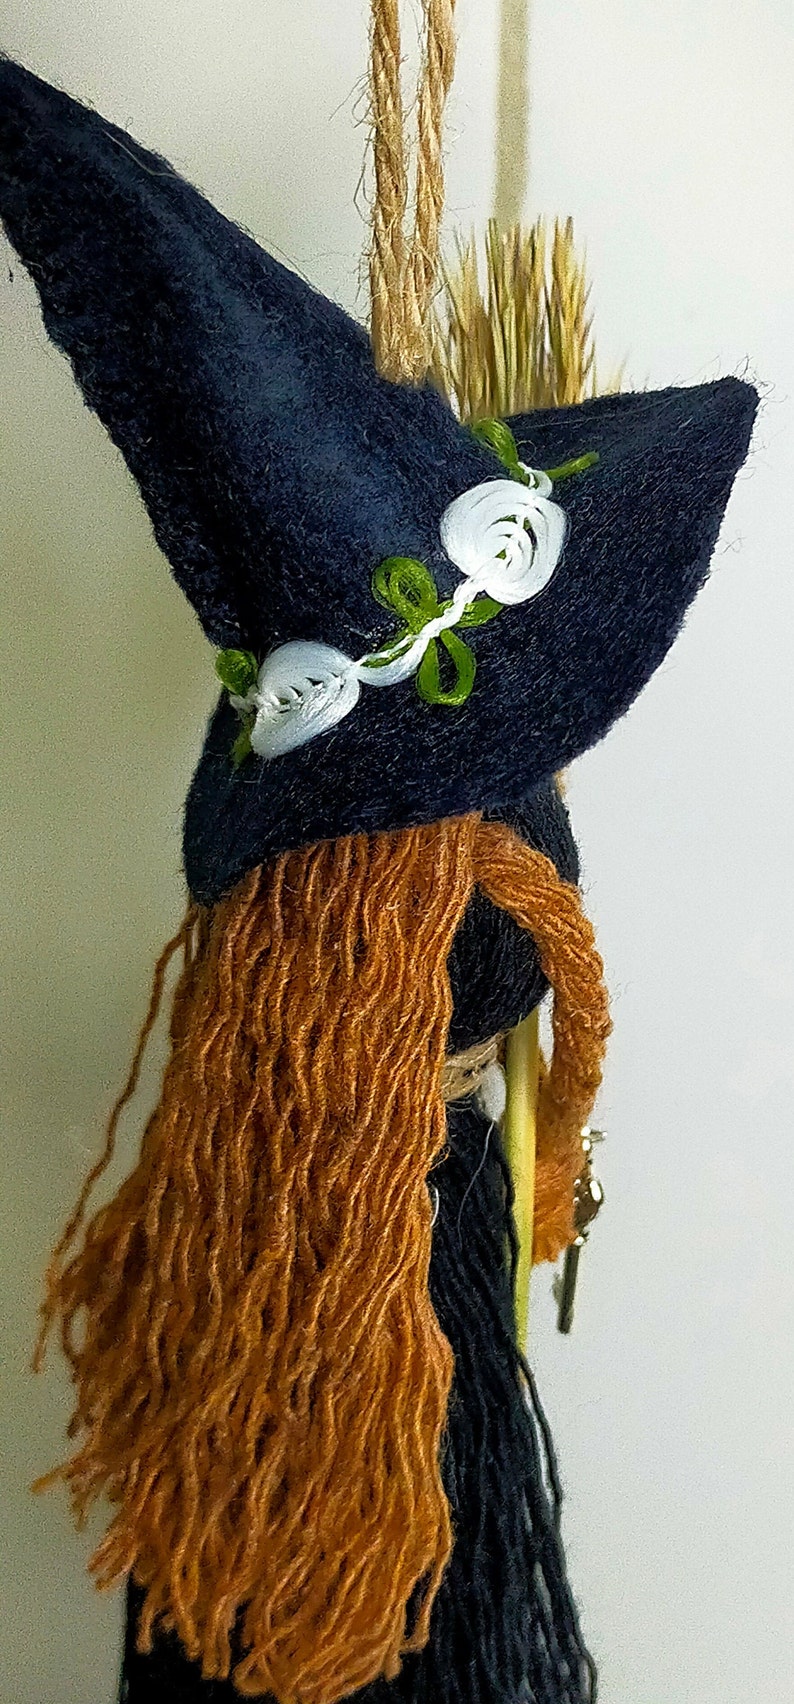 Kitchen Witch Wizard Handmade Witch Protection Luck Witch Broom, Vintage Design New Home Gift Housewarming, Boho nursery decor, Macrame Doll image 6